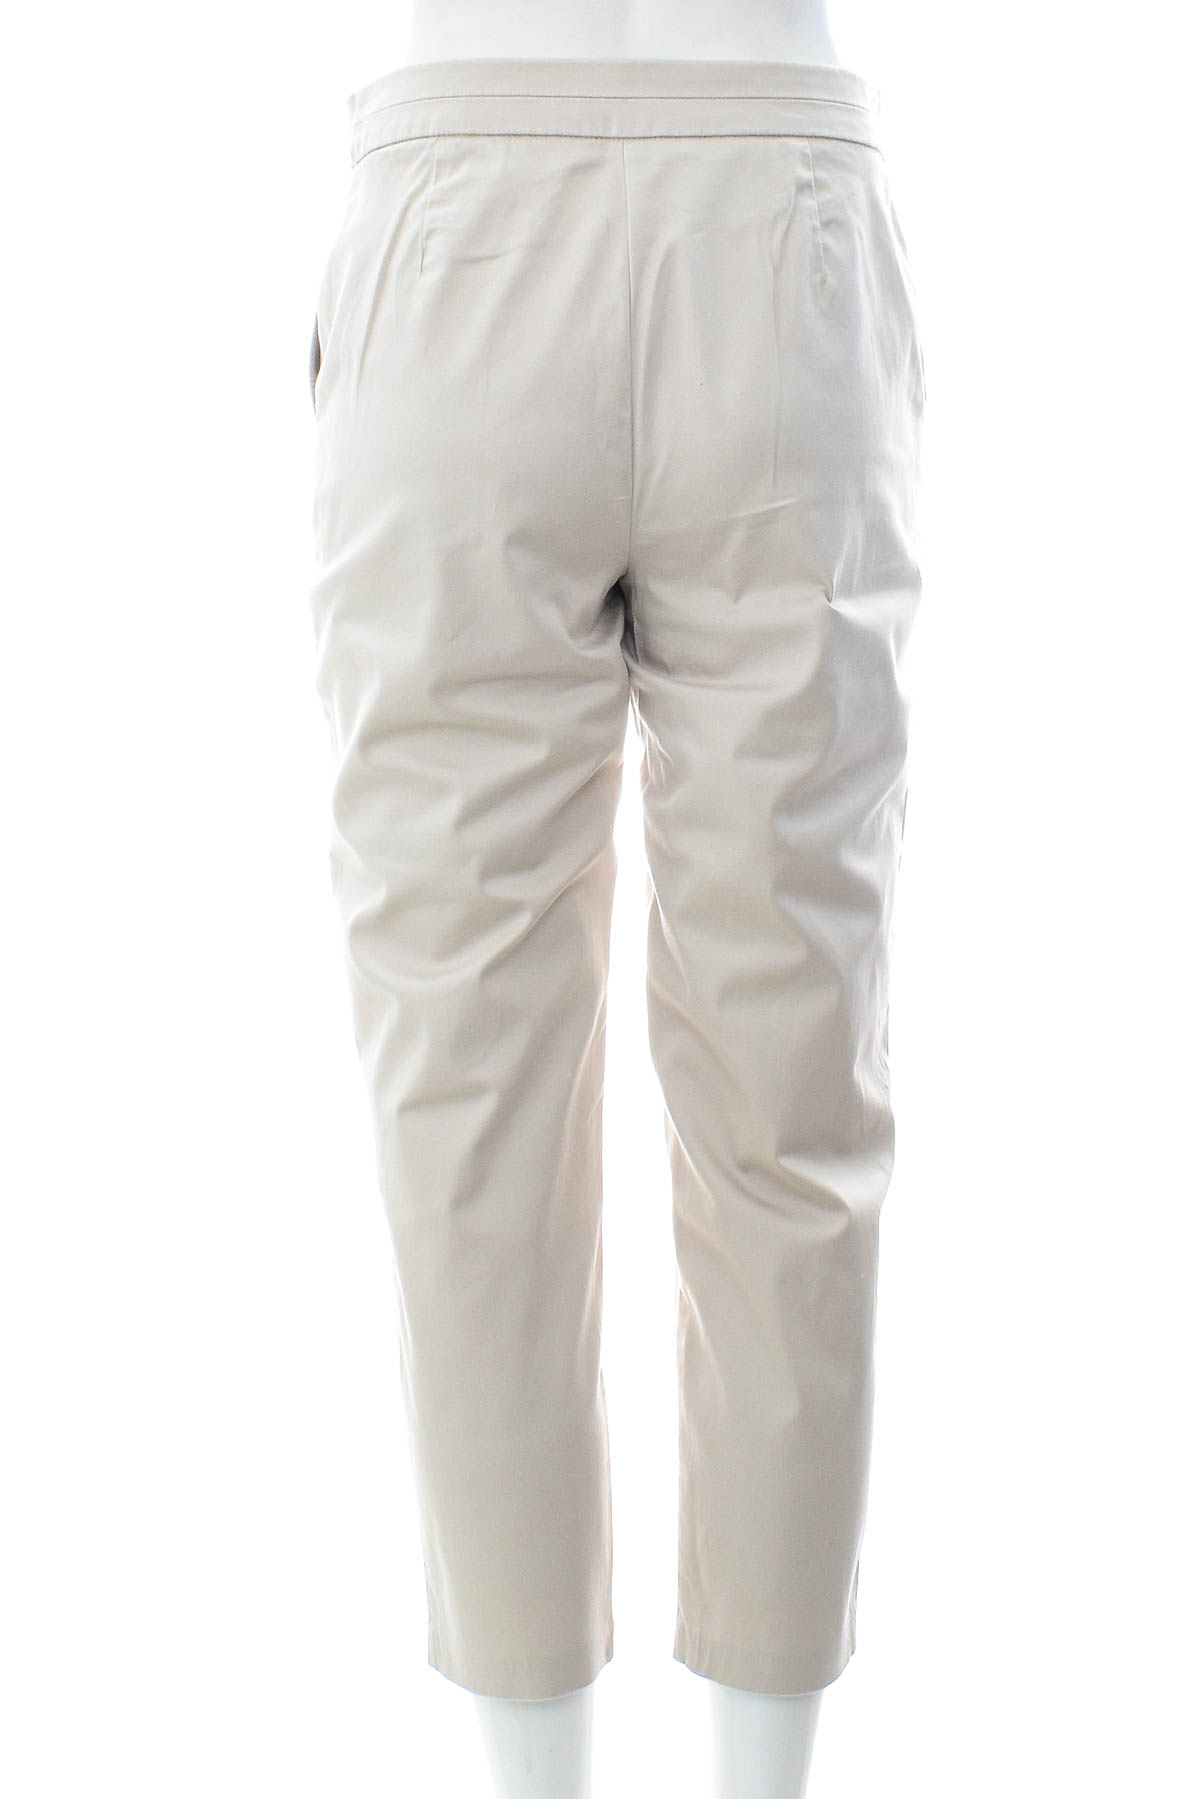 Women's trousers - M&S COLLECTION - 1